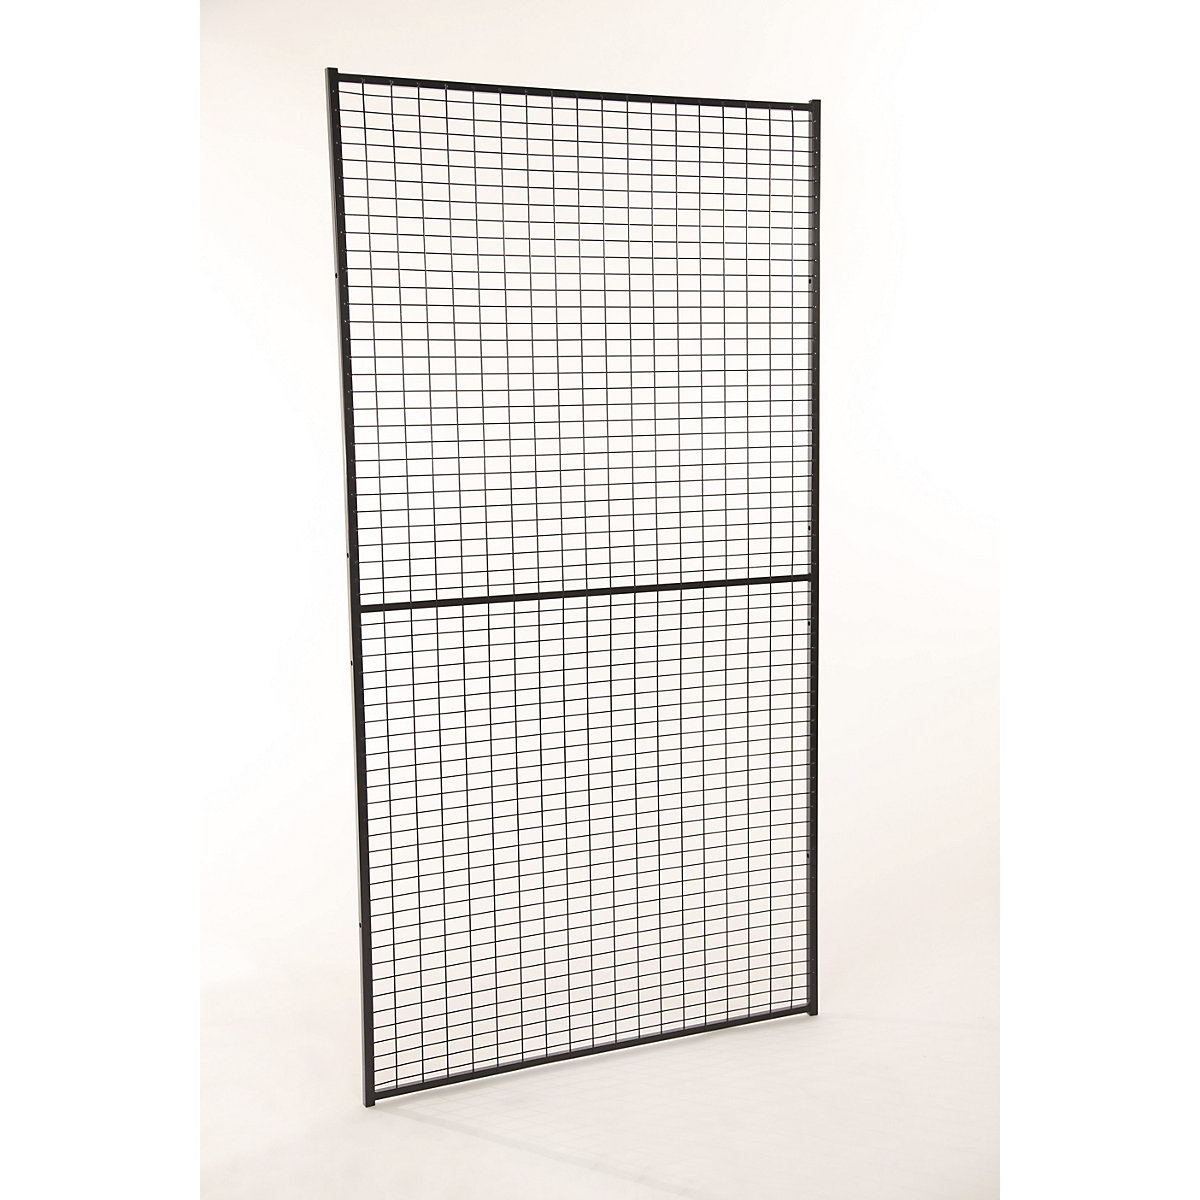 X-GUARD LITE machine protective fencing, wall section – Axelent, height 1900 mm, width 1000 mm-6